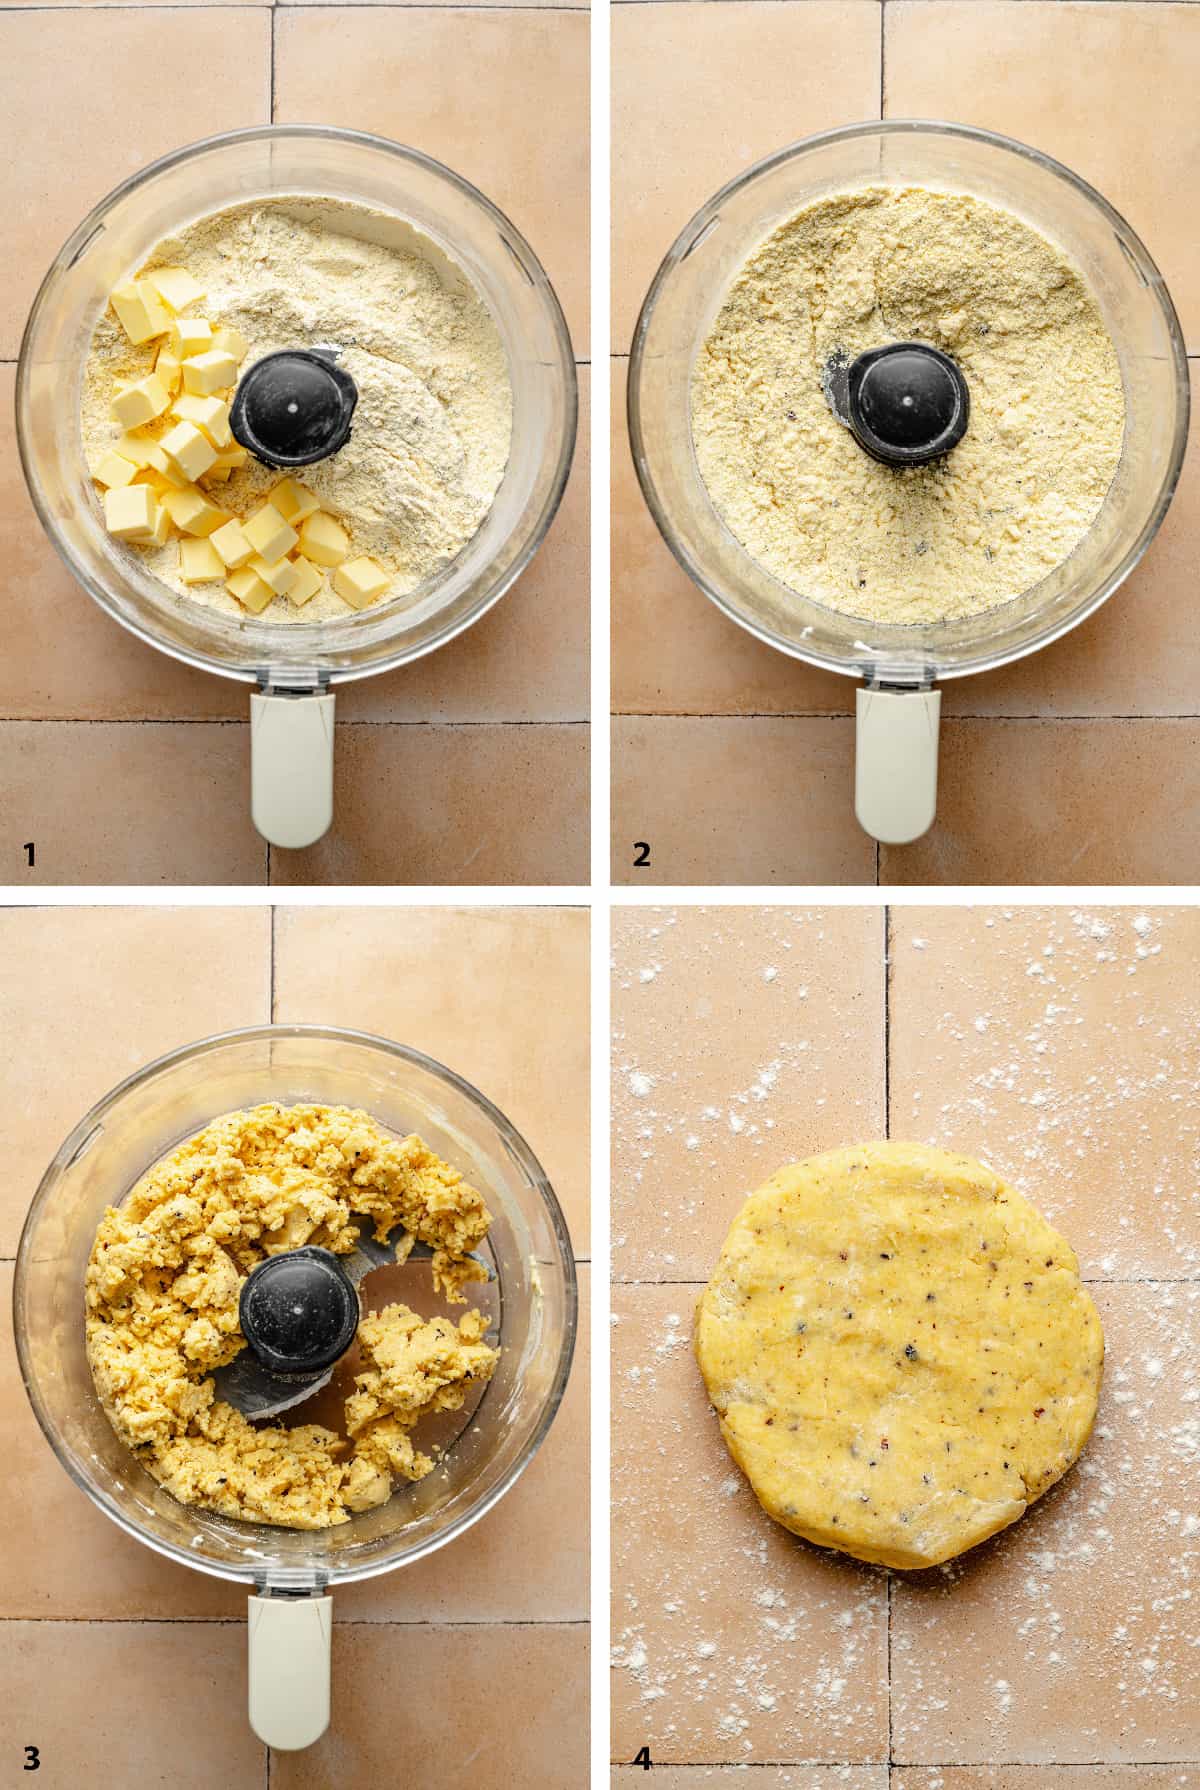 Process steps of creating the pastry from ingredients in food processor to disk of pastry.